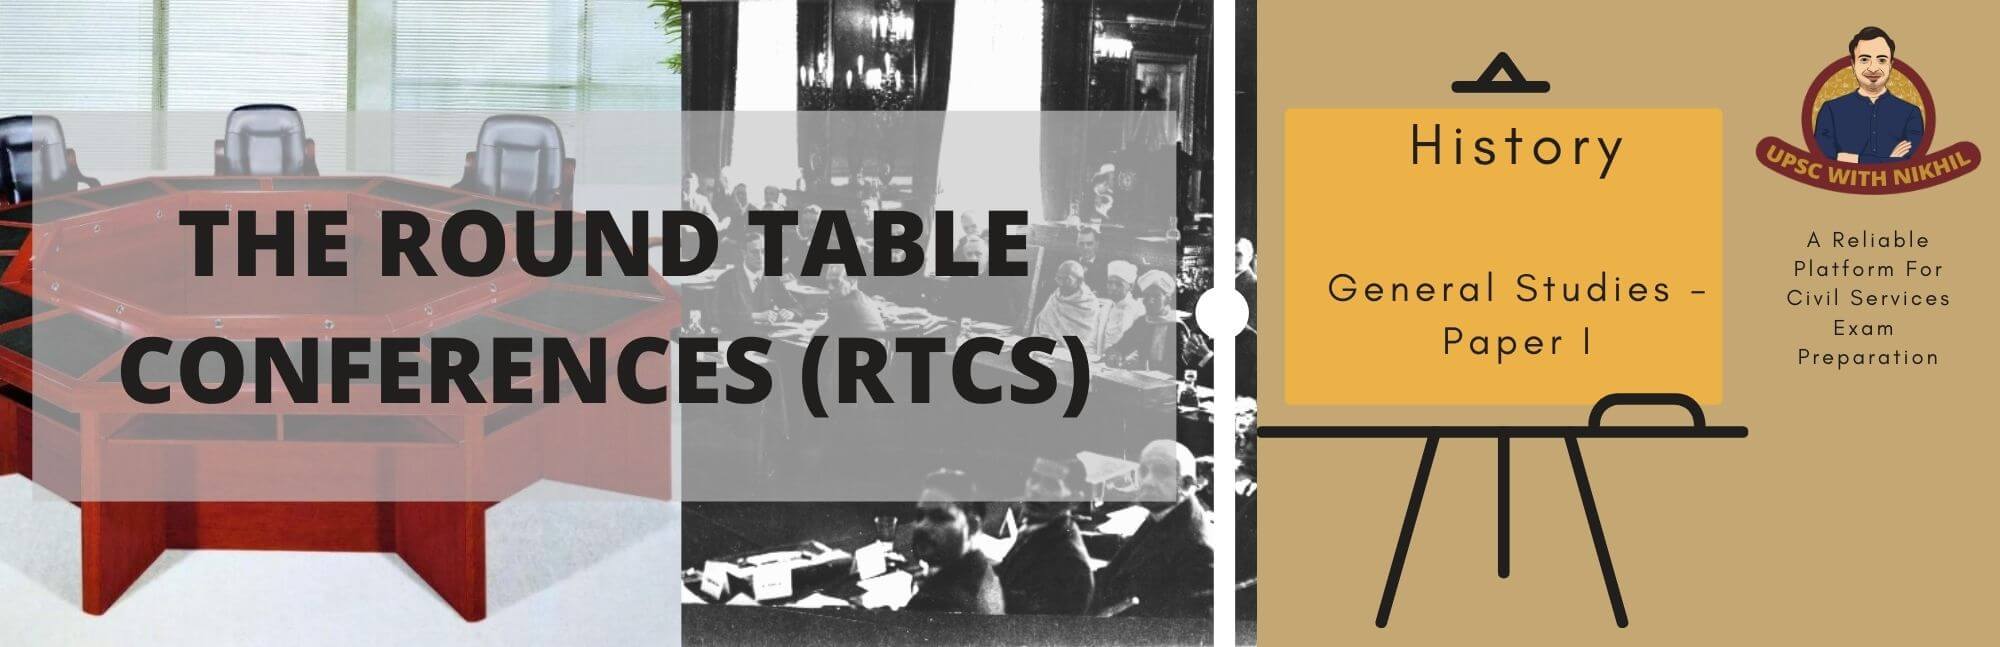 The Round Table Conferences Rtcs, Second Round Table Conference Upsc